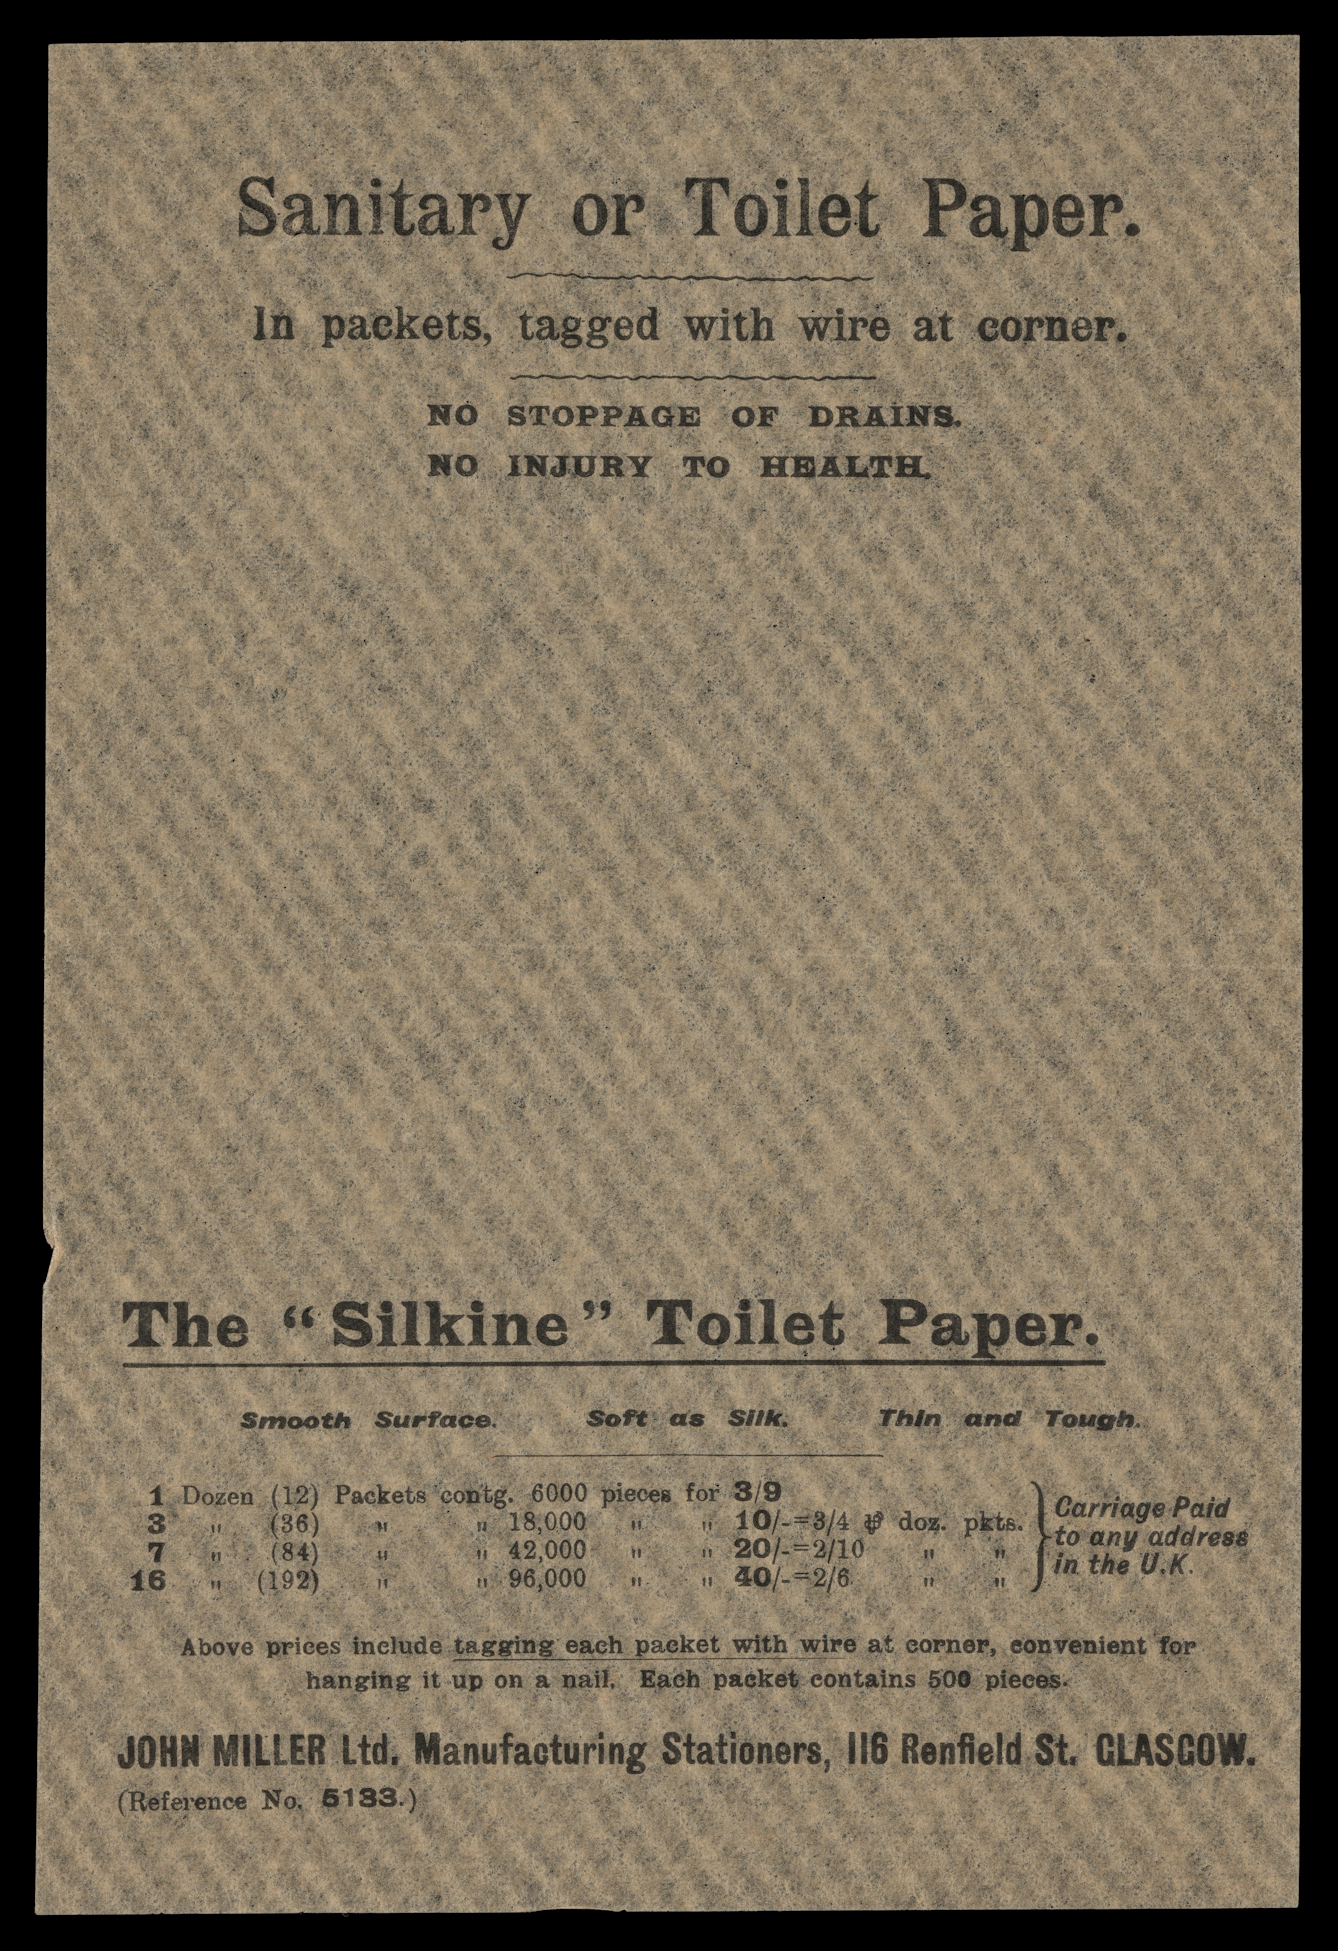 Photograph of a toilet paper sample sheet, bearing the title "Sanitary or Toilet Paper".